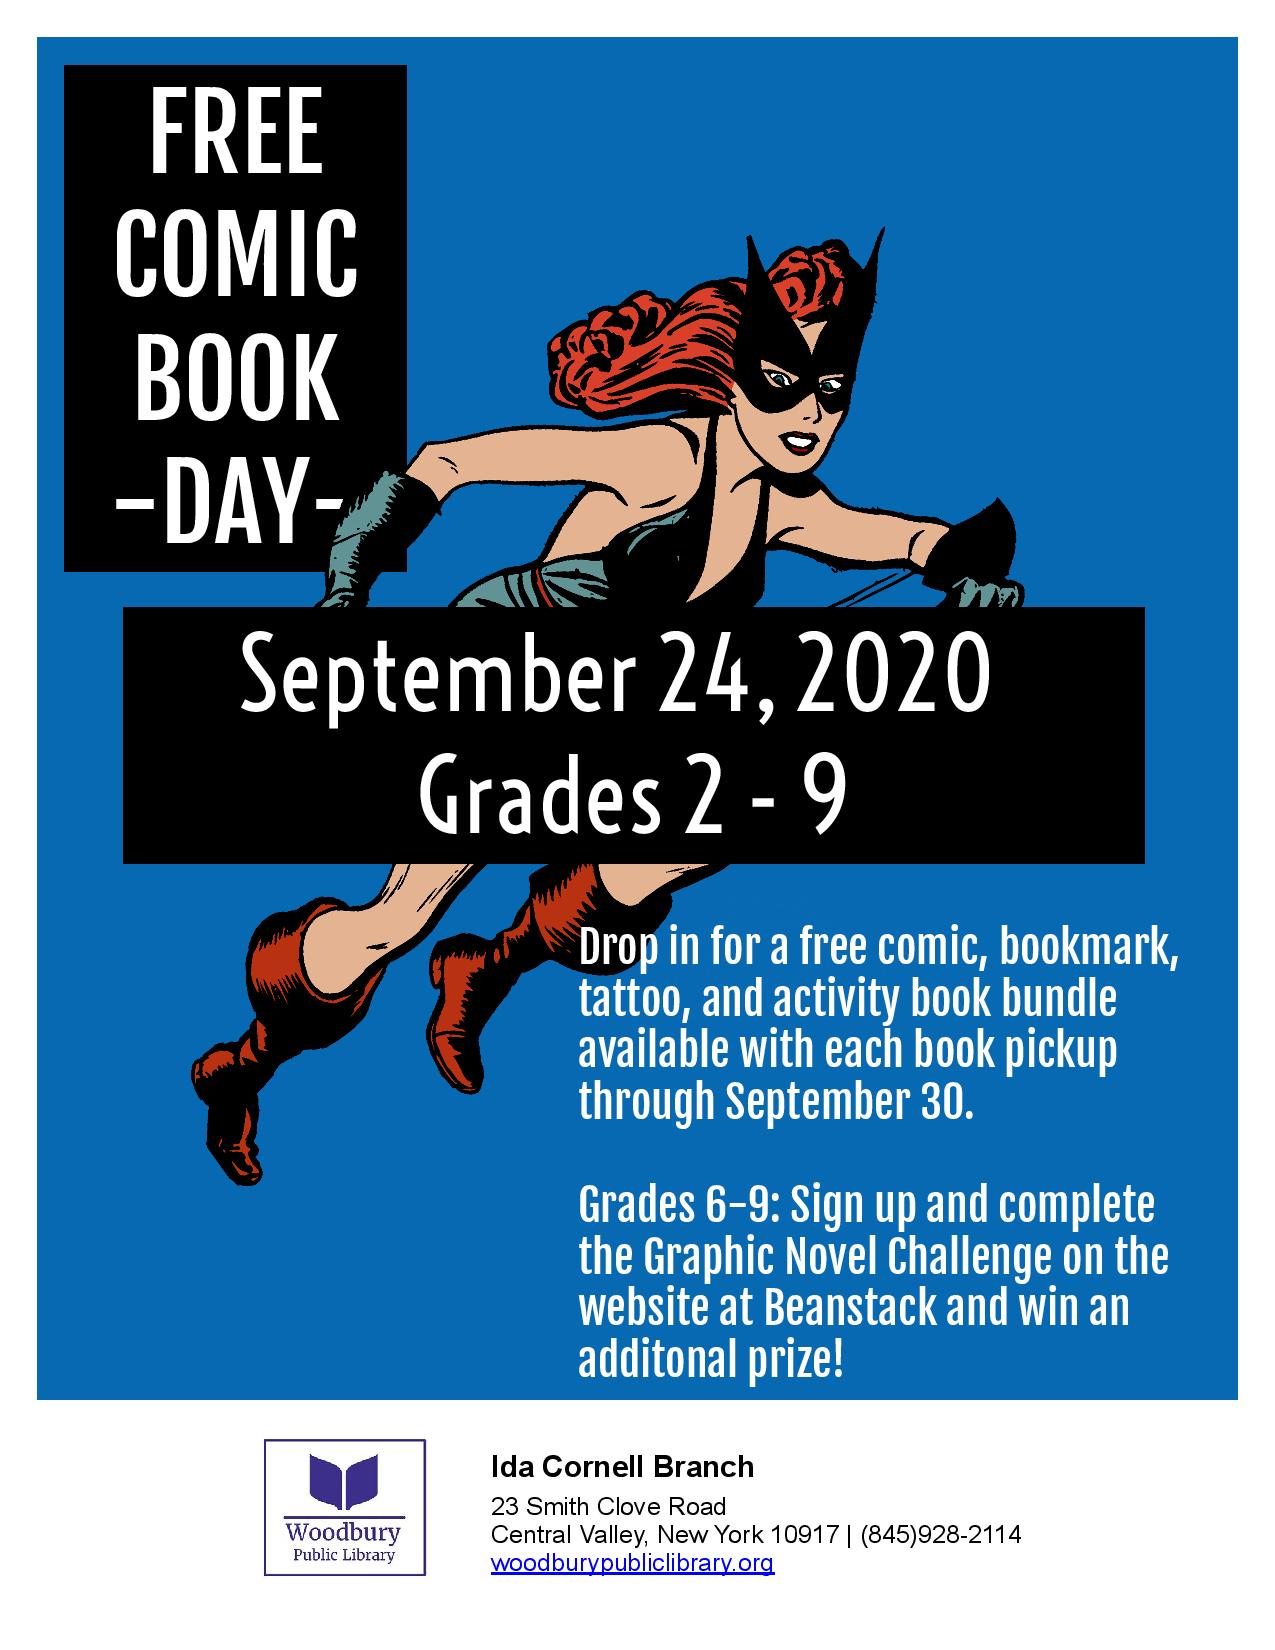 Free Comic Book Day / Graphic Novel Challenge Woodbury Public Library